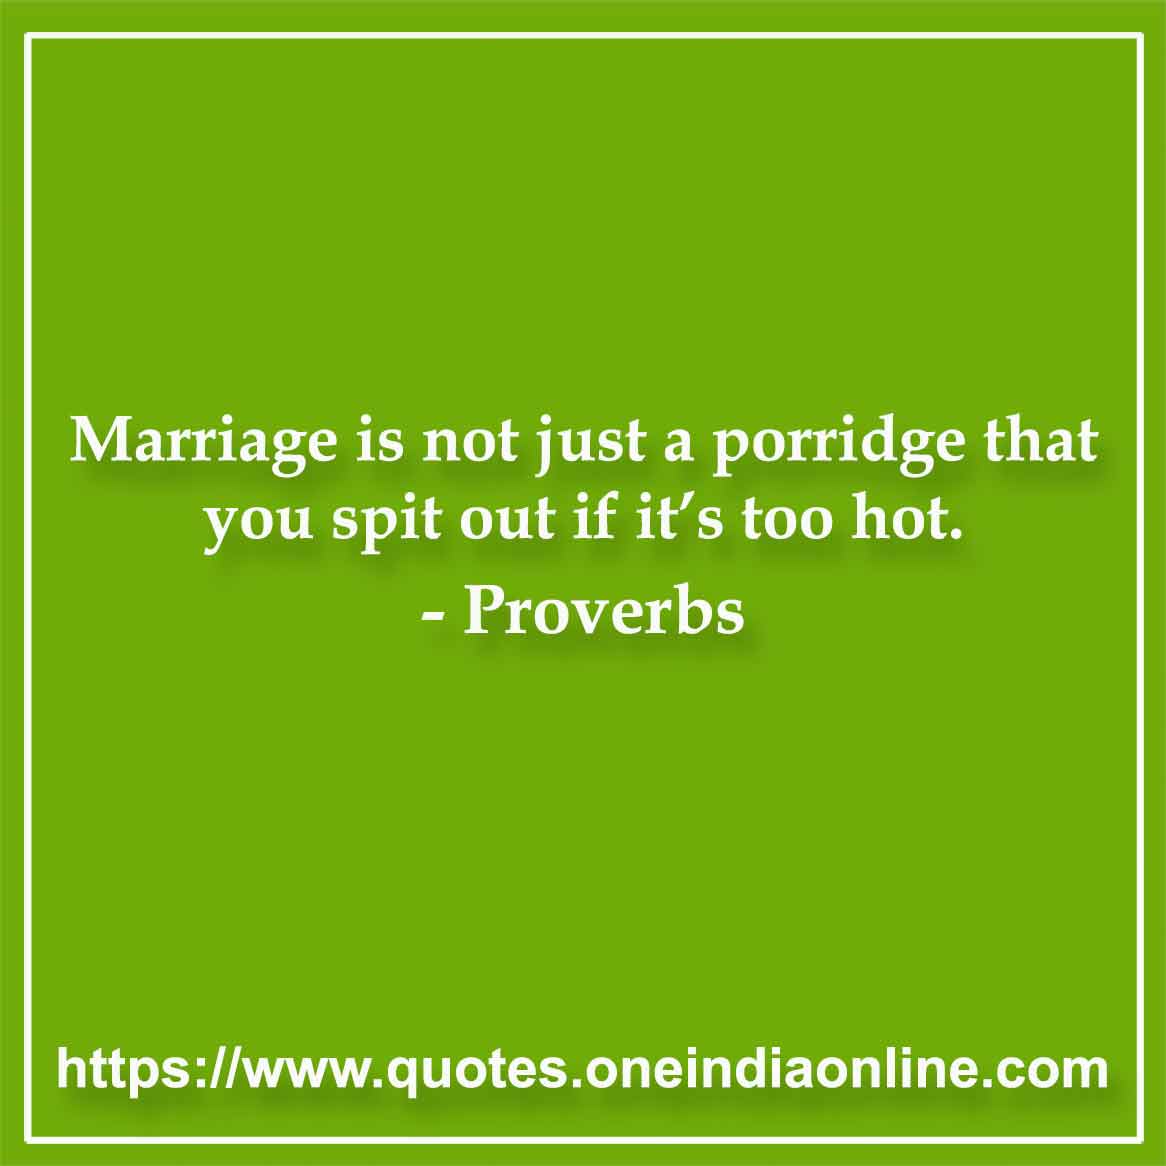 Marriage is not just a porridge that you spit out if it’s too hot.

- Filipino Proverbs